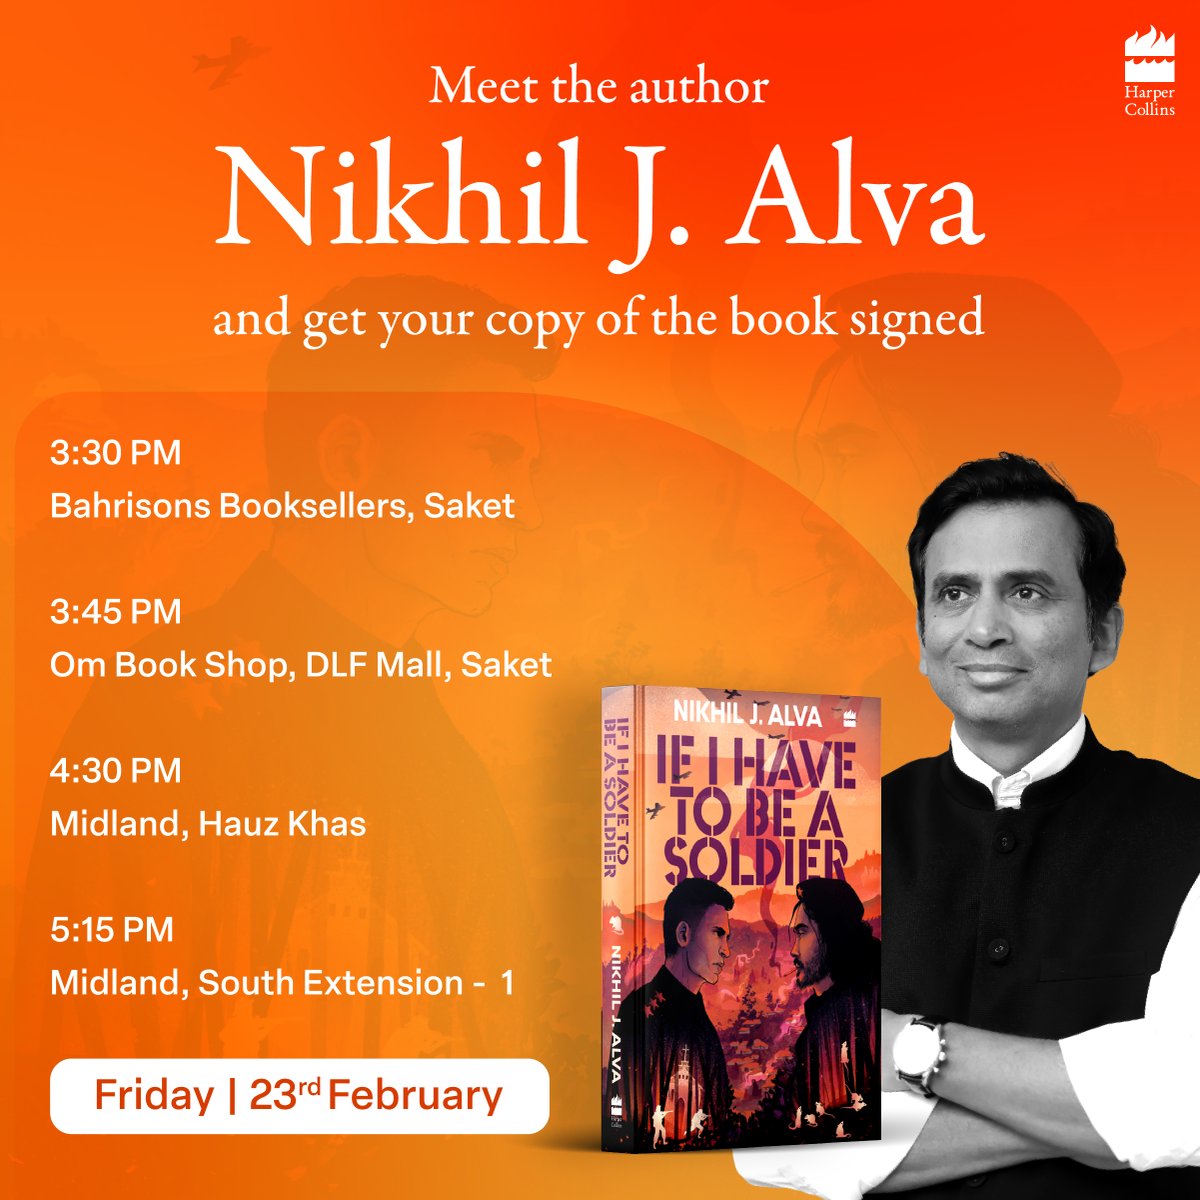 #Delhi readers, get signed copies of @njalva's stunning novel #IfIHaveToBeASoldier from local bookstores and get a chance to meet him on 23rd February at @Bahrisons_books, @Ombookshops, @midlandbook and @midlandsouthex.